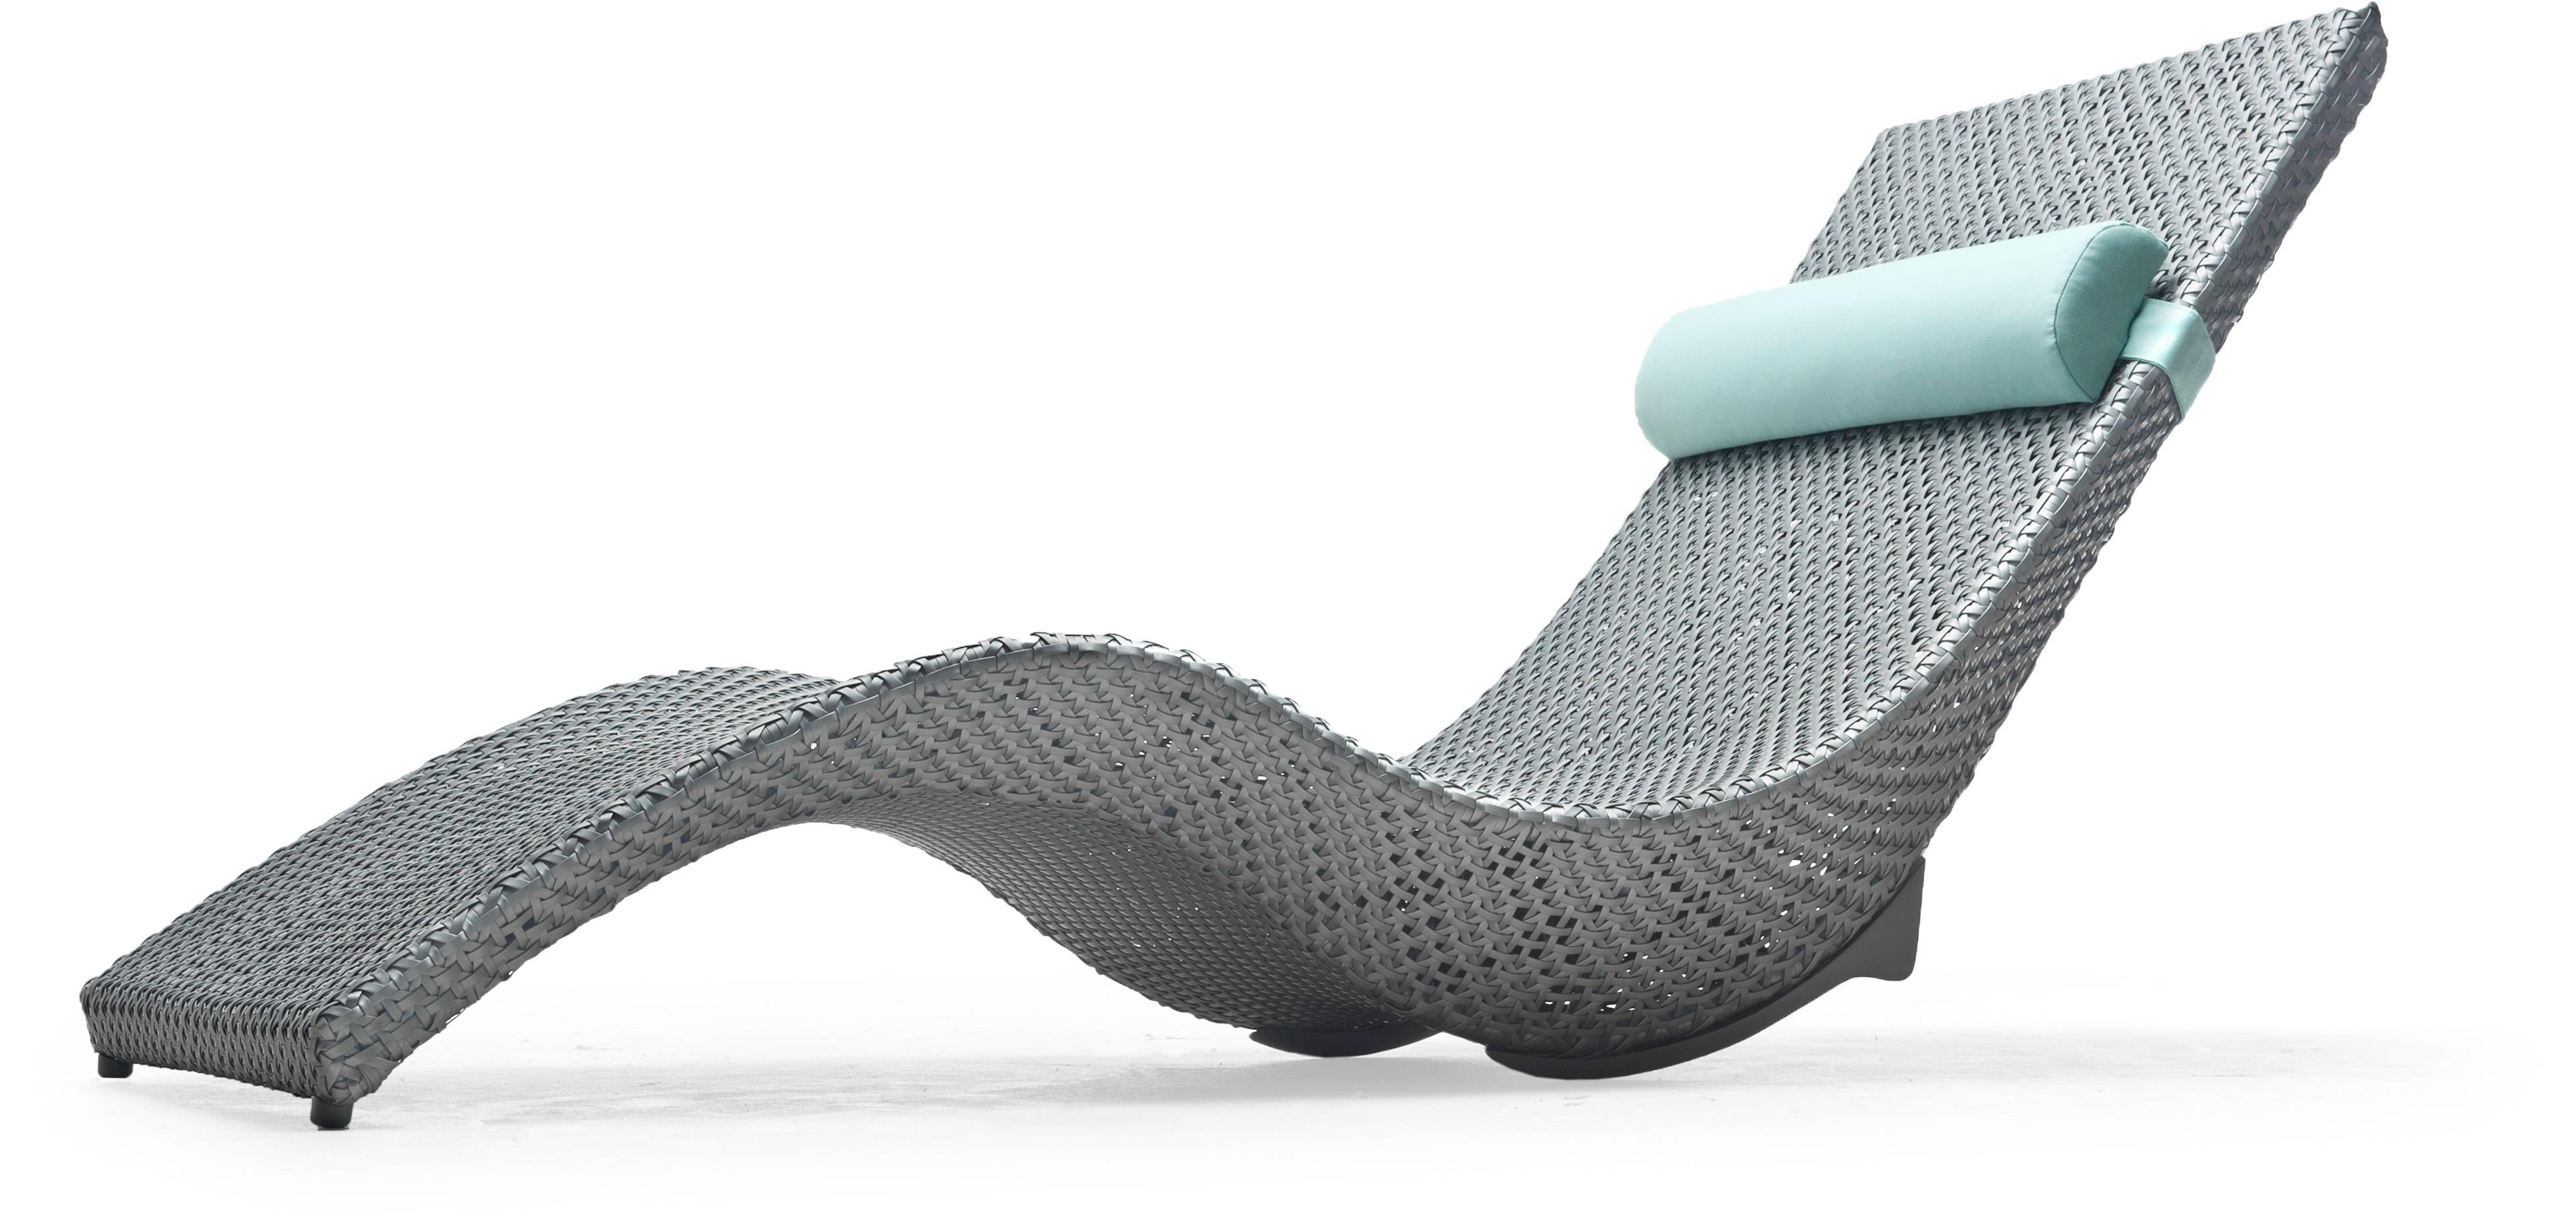 Mermaid chaise lounge by Kenneth Cobonpue.
Materials: Polyethelene. Aluminum.
Also available in other colors. 
Dimensions: 170cm x 69cm x H 88cm

The Mermaid is a unique and sensual design made of woven polyethylene over a powder-coated